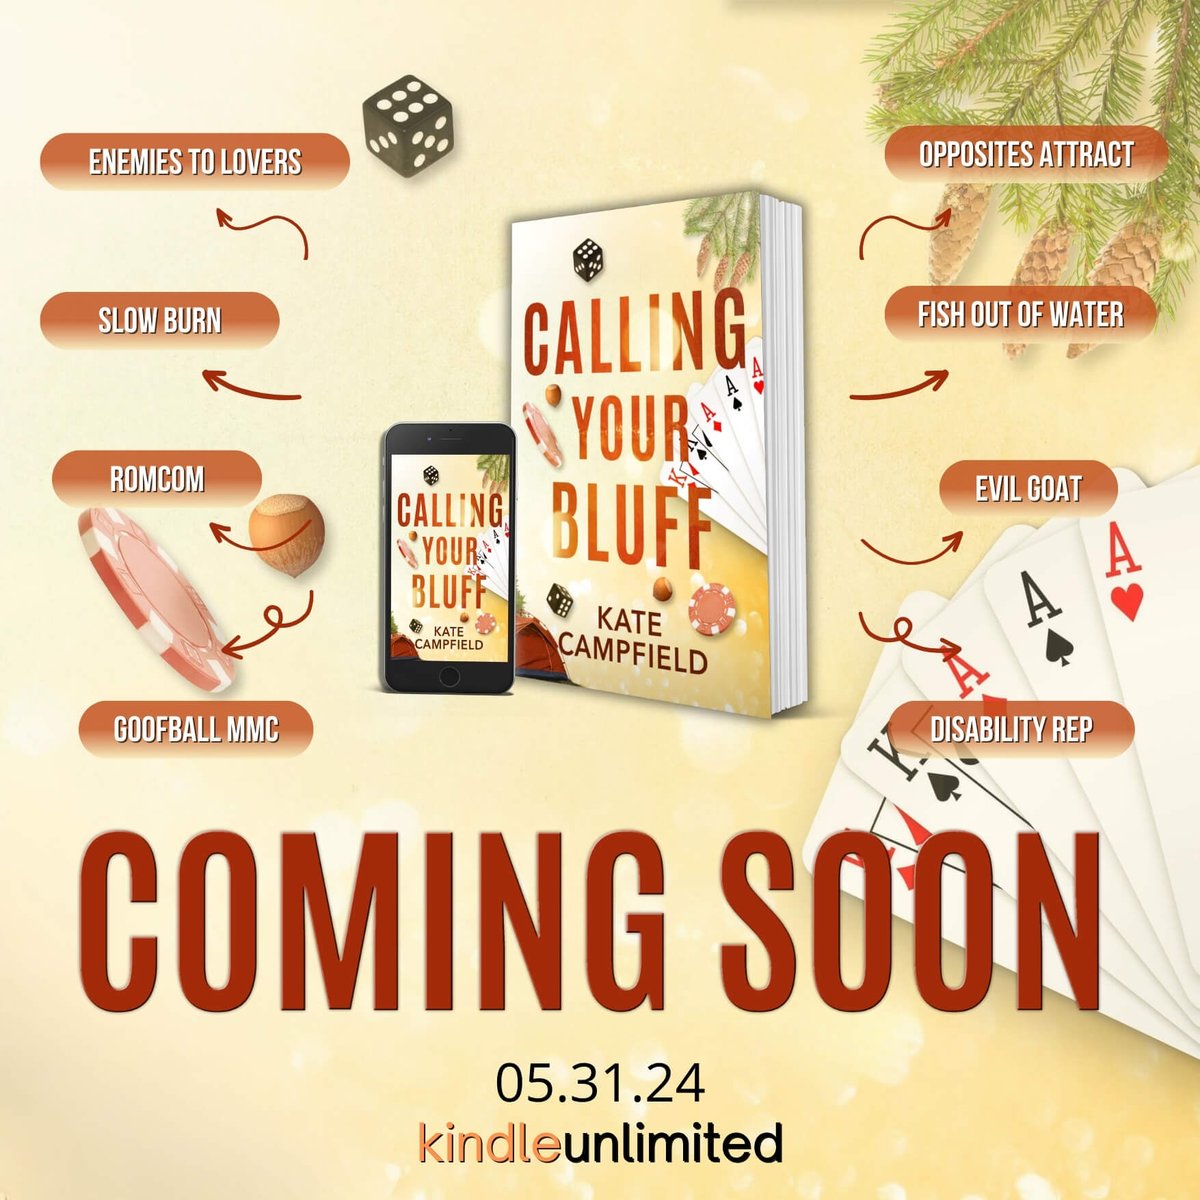 ✨PREORDER NOW✨ 

CALLING YOUR BLUFF by #kcampfield is coming May 31

#PreOrder 
amzn.to/3Jovo7s

#preordernow #enemiestolovers #kindleunlimited #katecampfield #oppositesattract #romcom #disabilityrep #newbookalert  #spicyromance #theauthoragency @theauthoragency